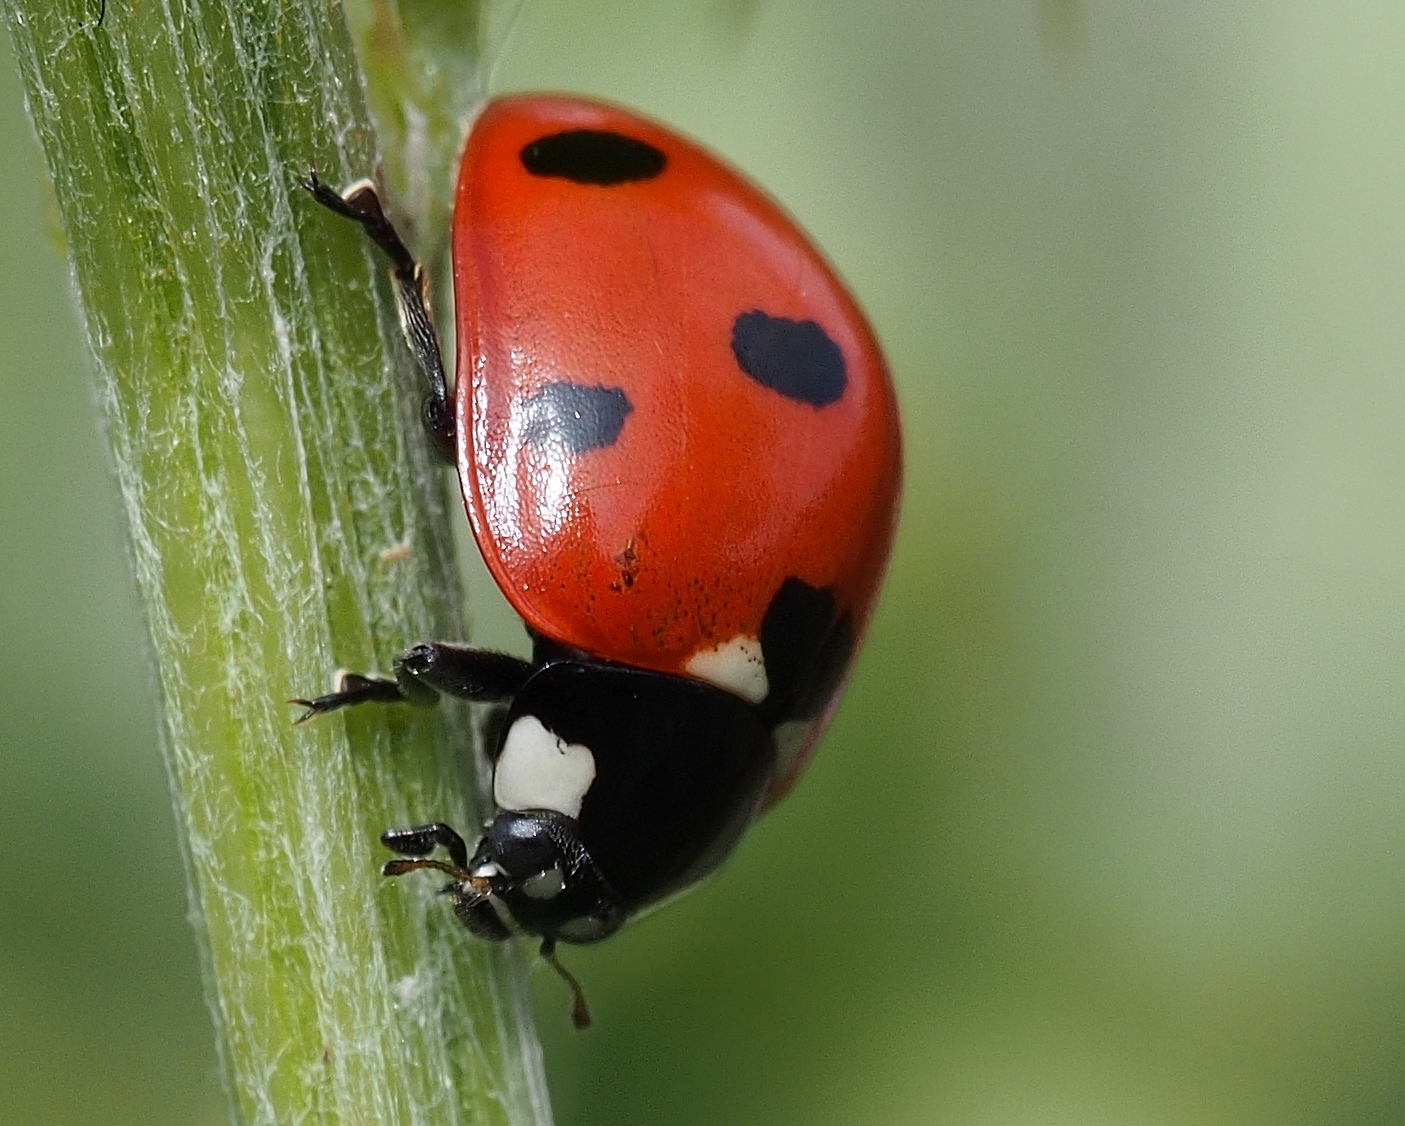 the lady bug is very bright and red